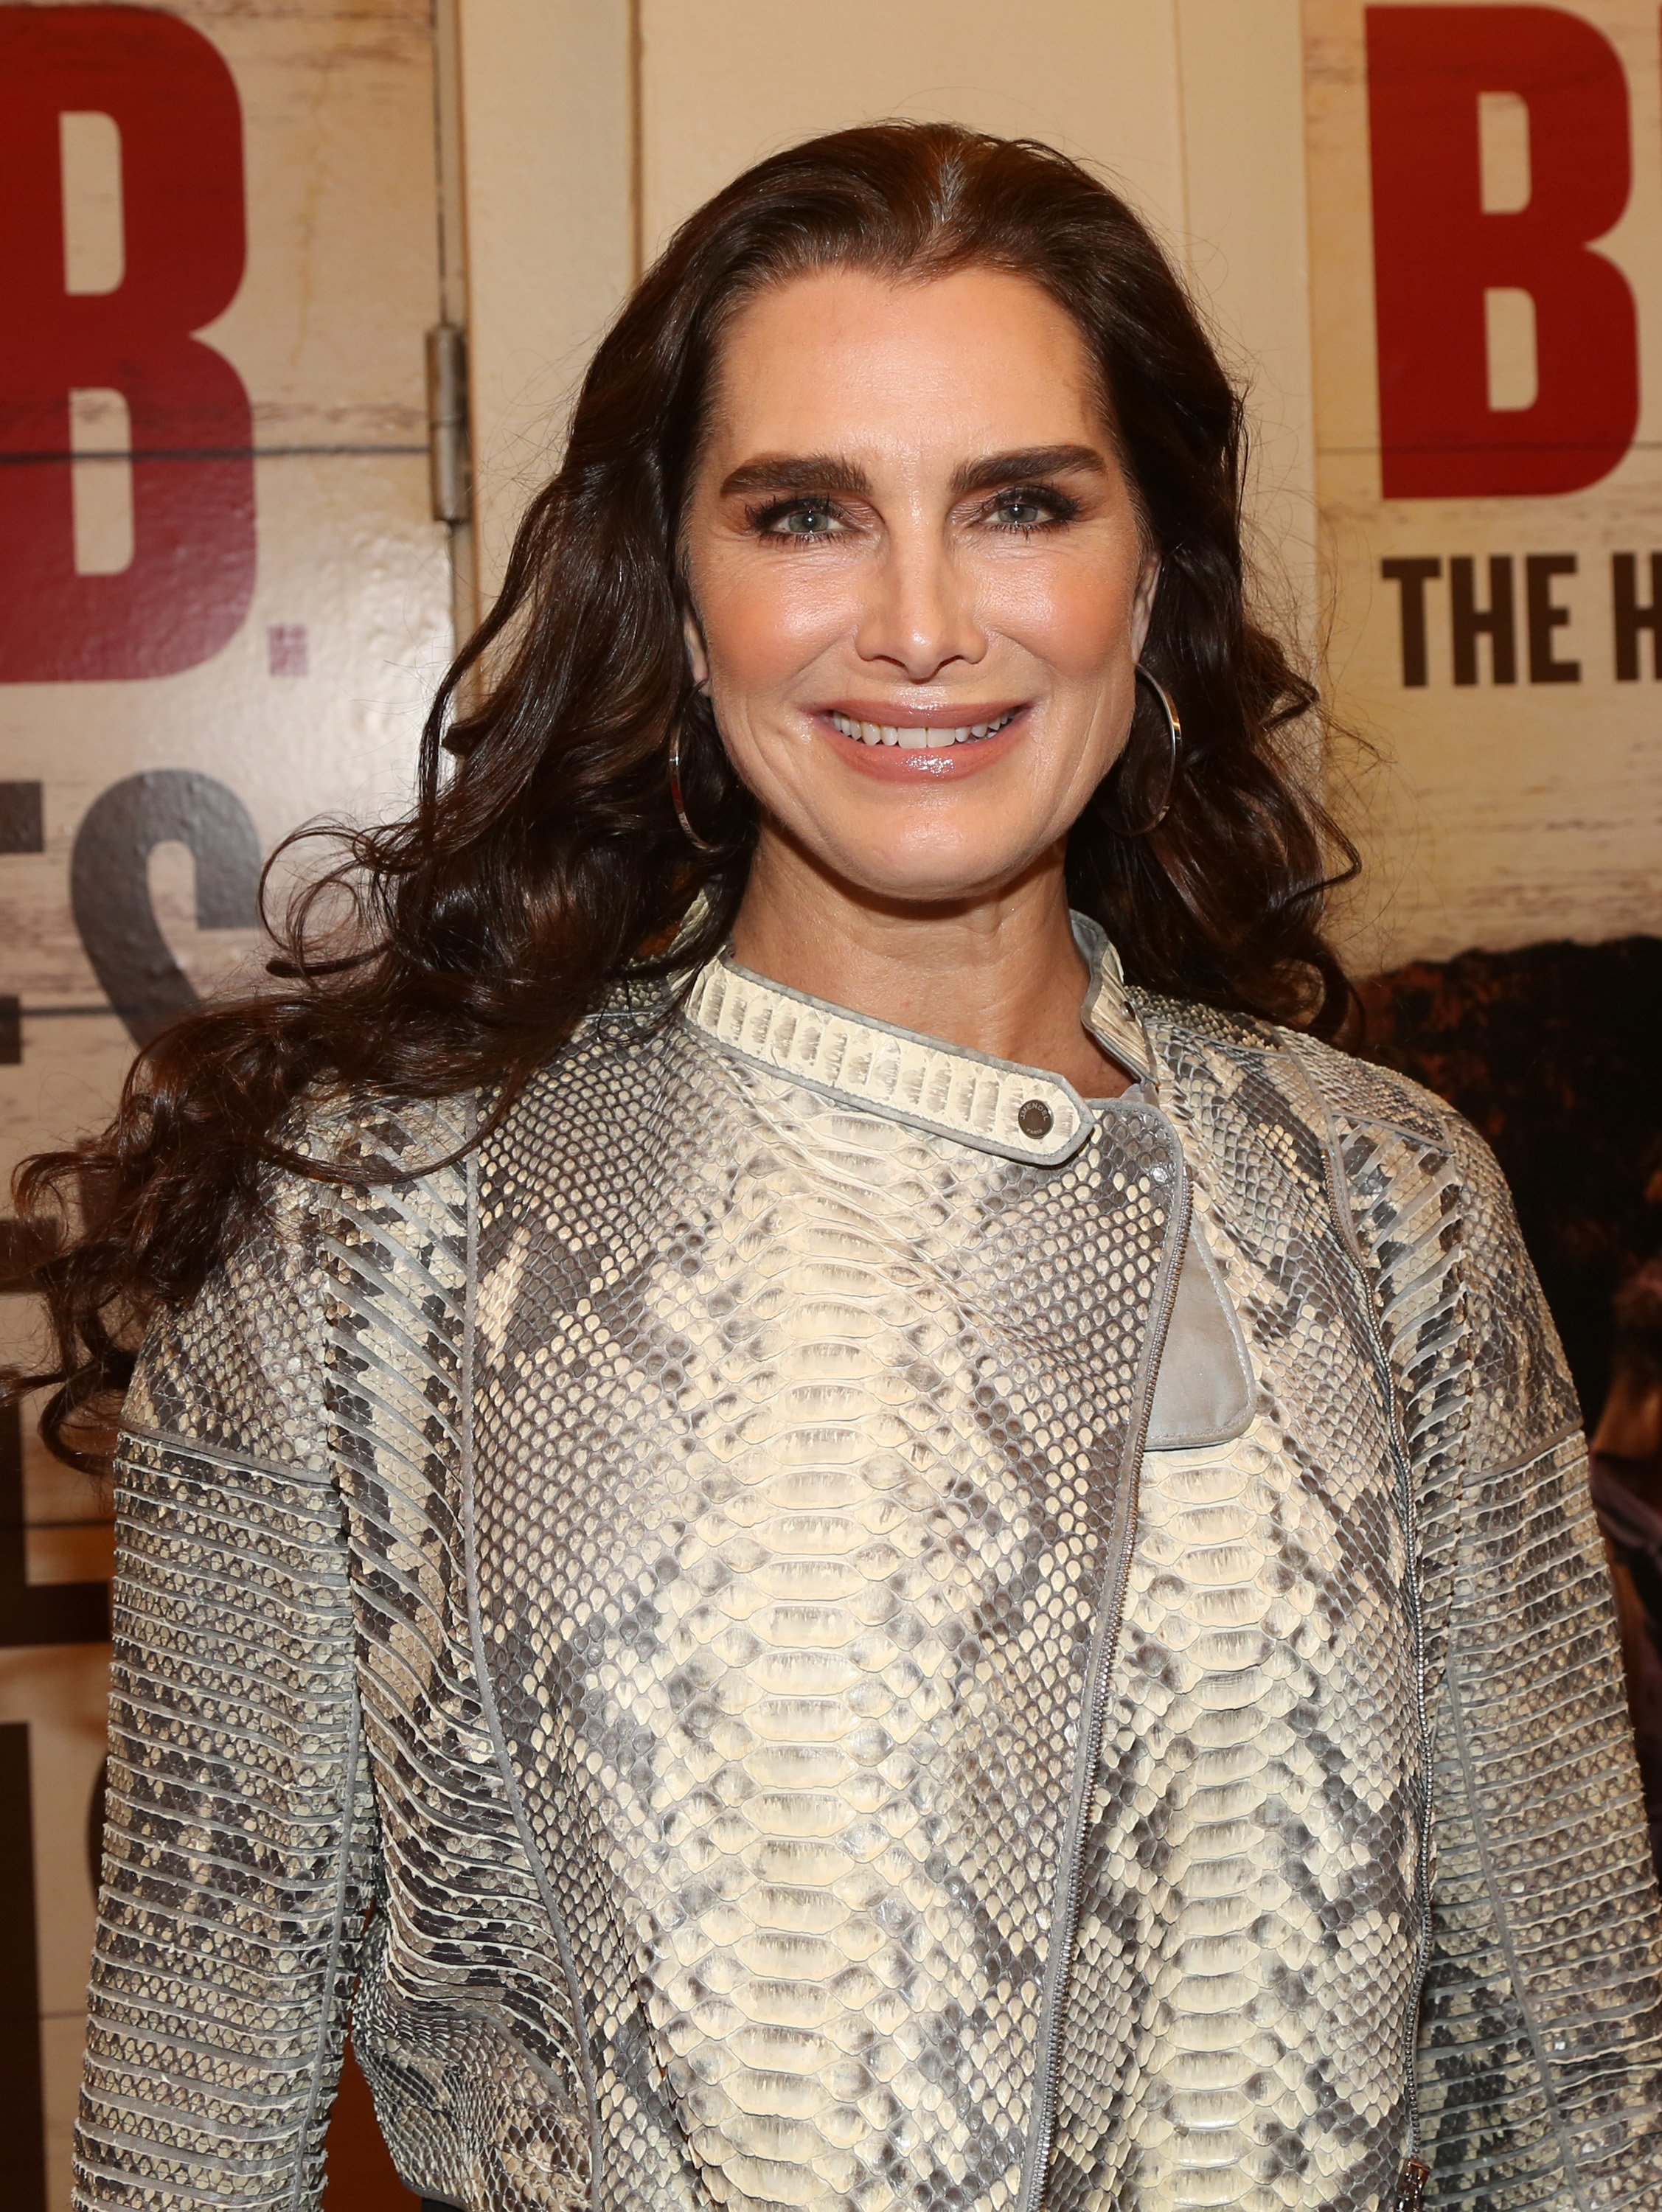 Brooke Shields attends the opening of the musical "Girl From the North Country" in New York City on March 5, 2020 | Photo: Getty Images